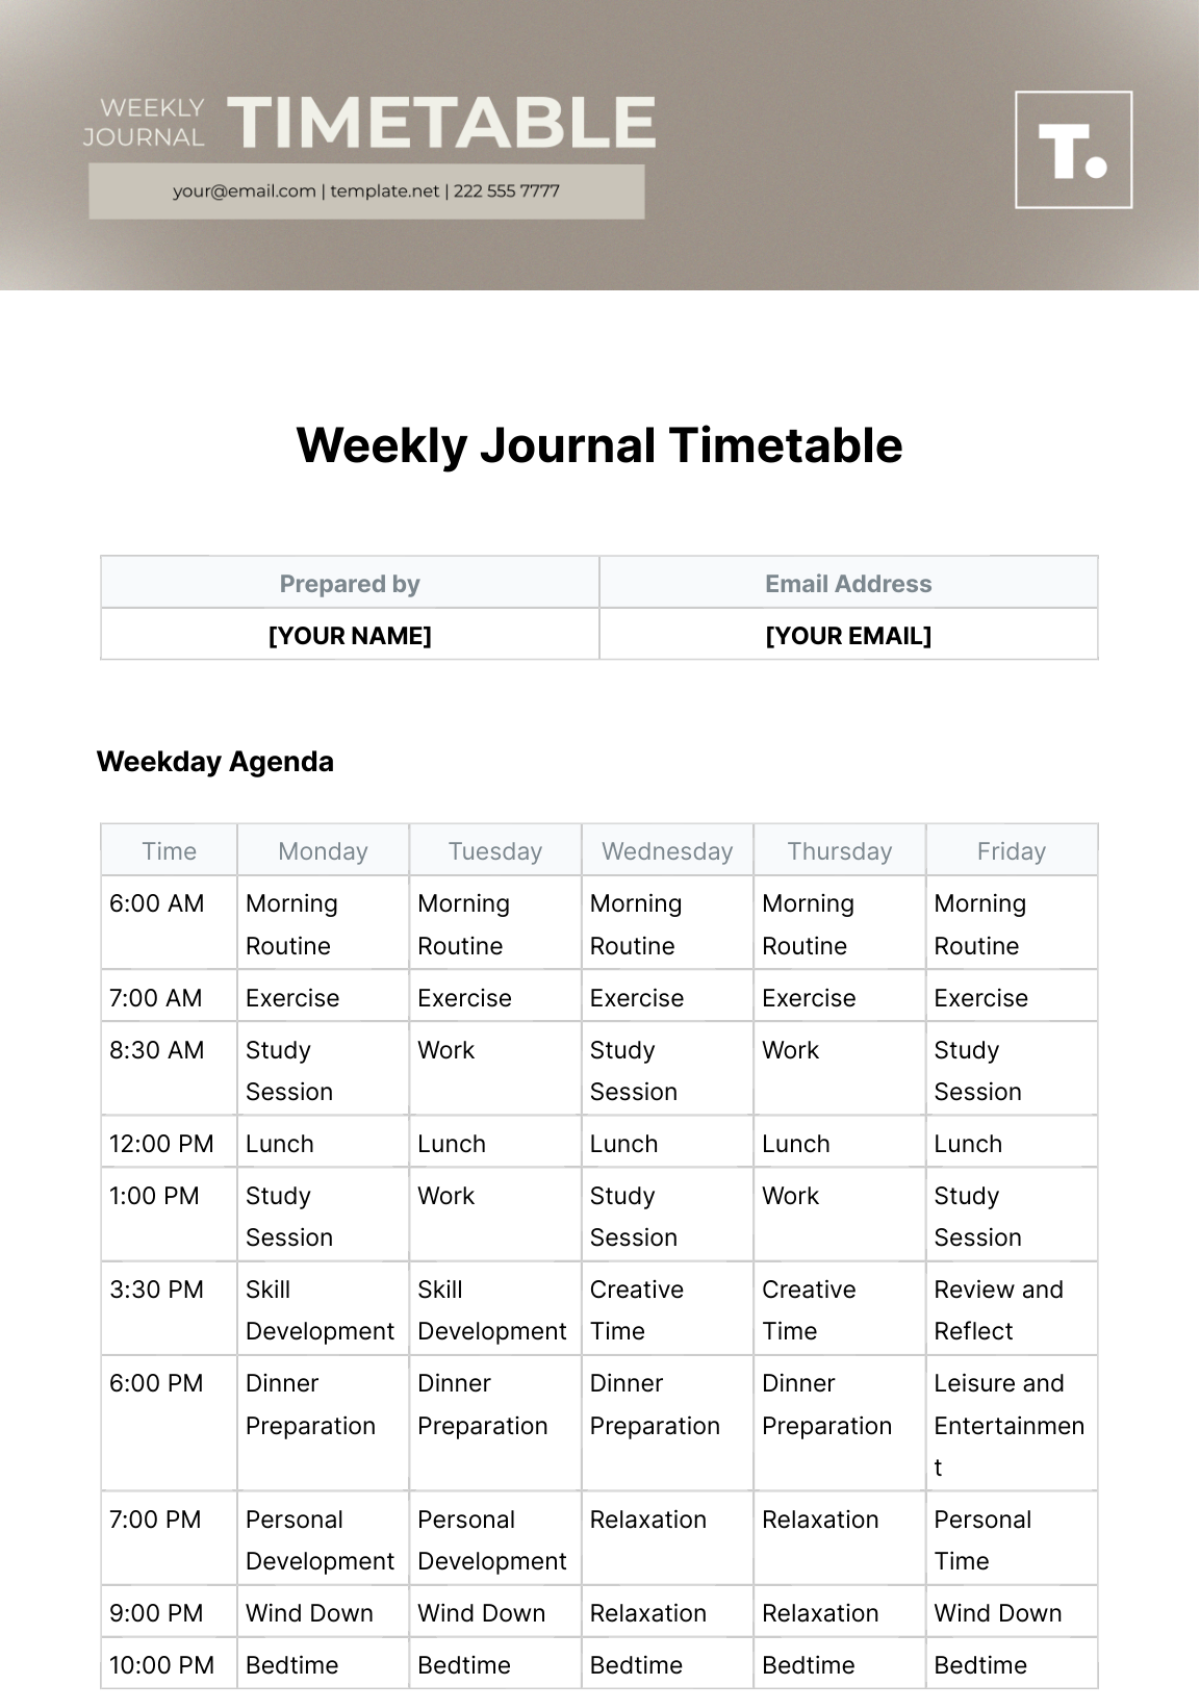 Free Weekly Journal Timetable Template